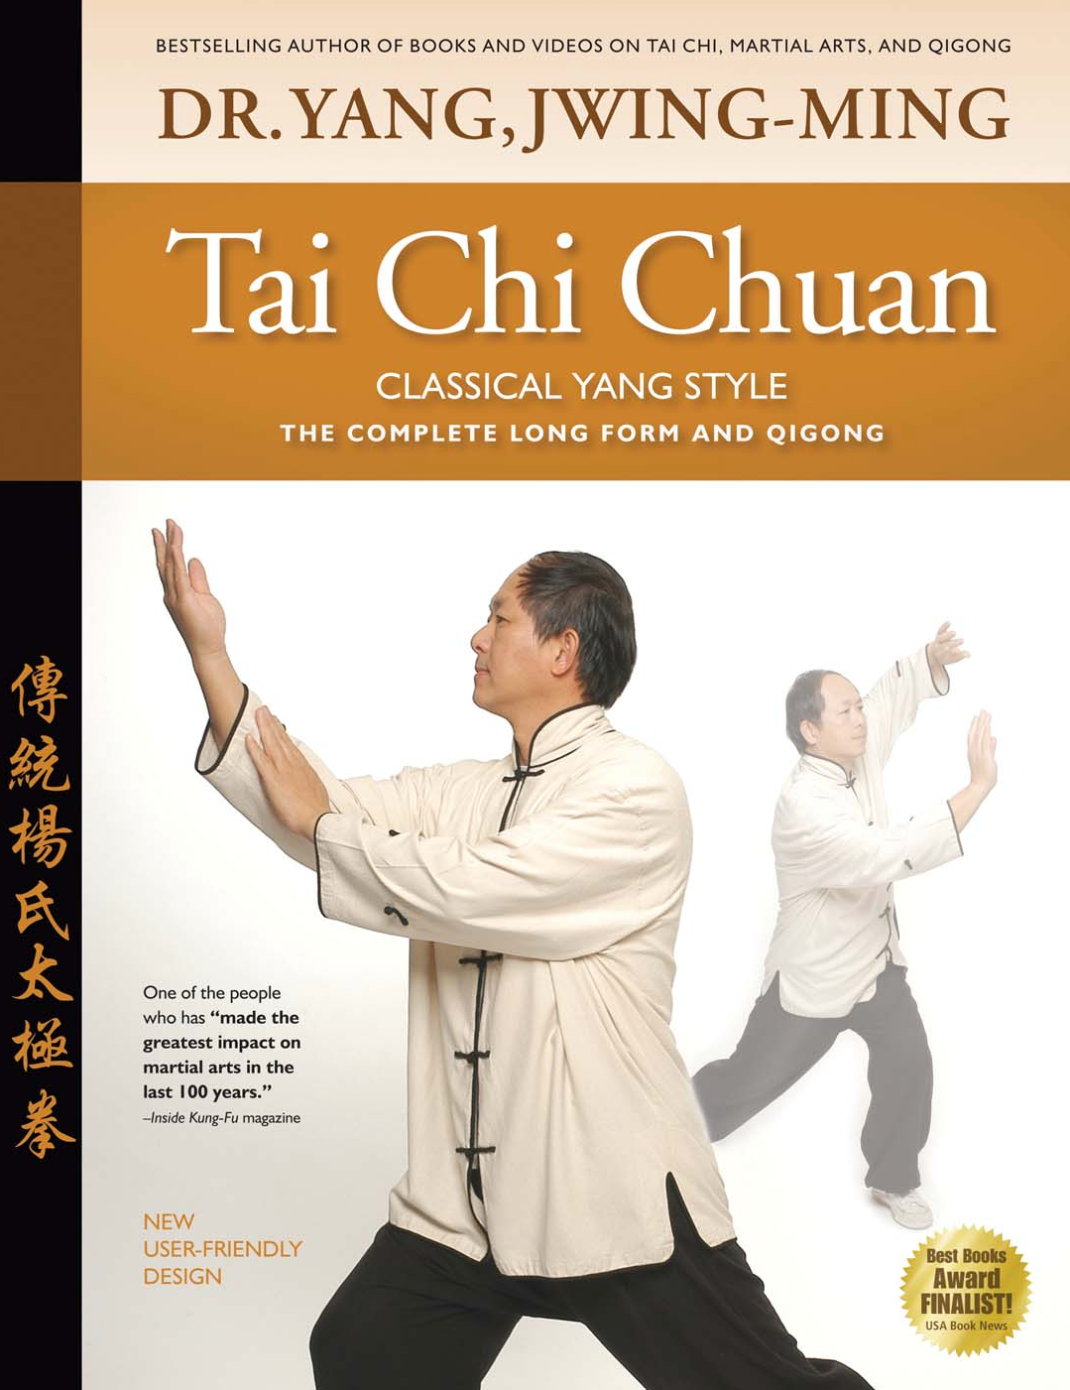 Tai Chi Chuan, Classical Yang Style—The Complete Form and Qigong (Revised 2nd Edition) Book by Dr Yang, Jwing-Ming - Budovideos Inc